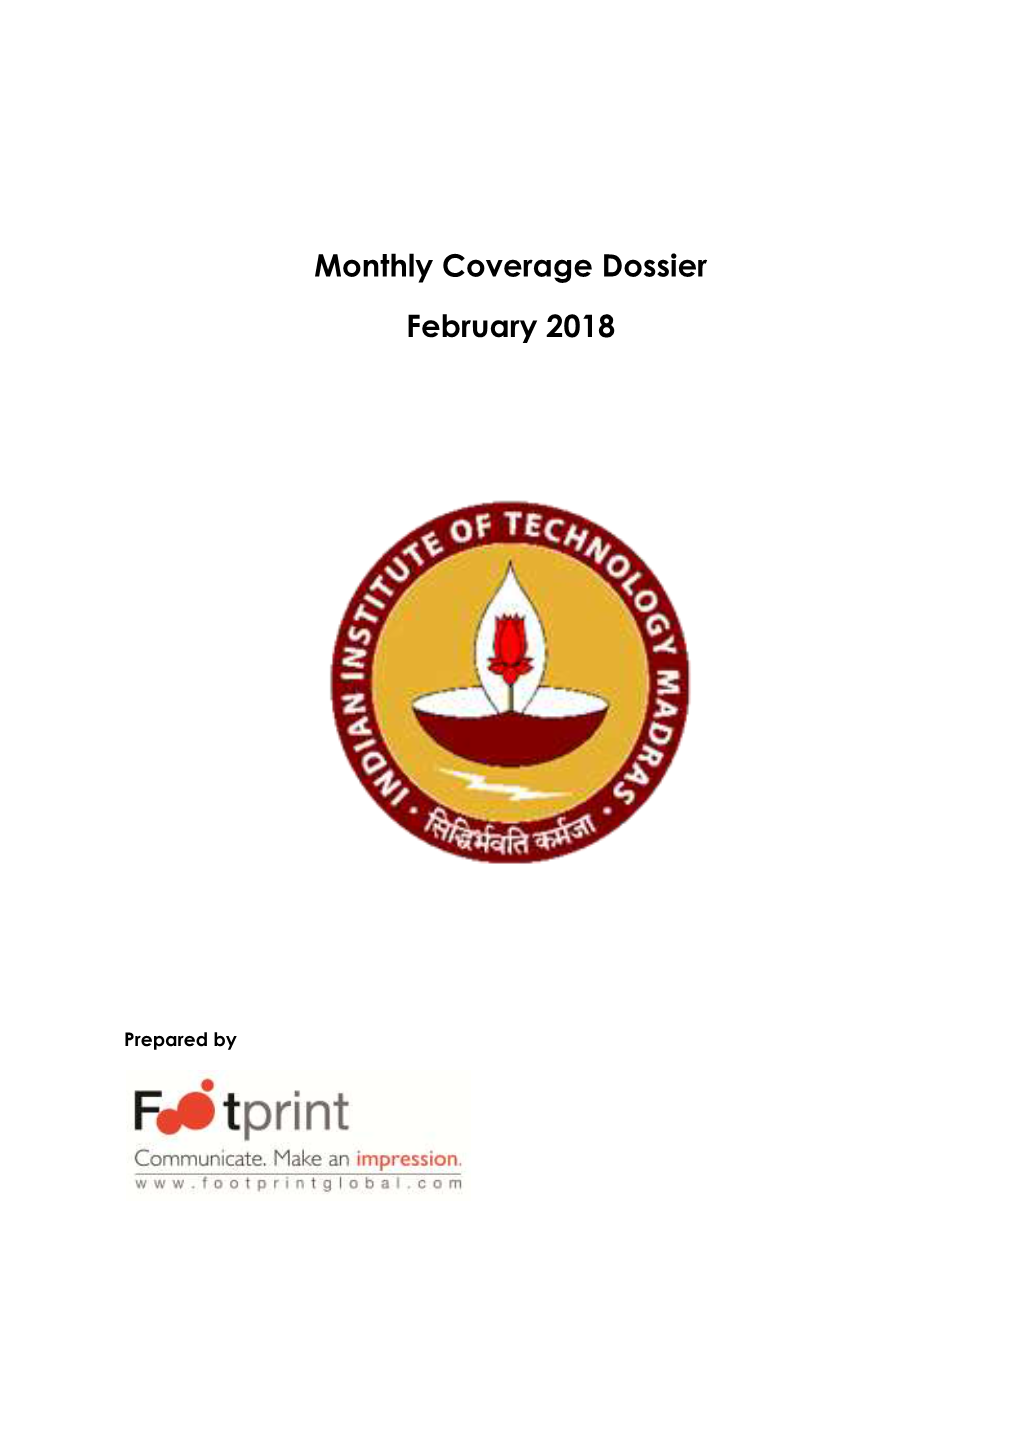 Monthly Coverage Dossier February 2018